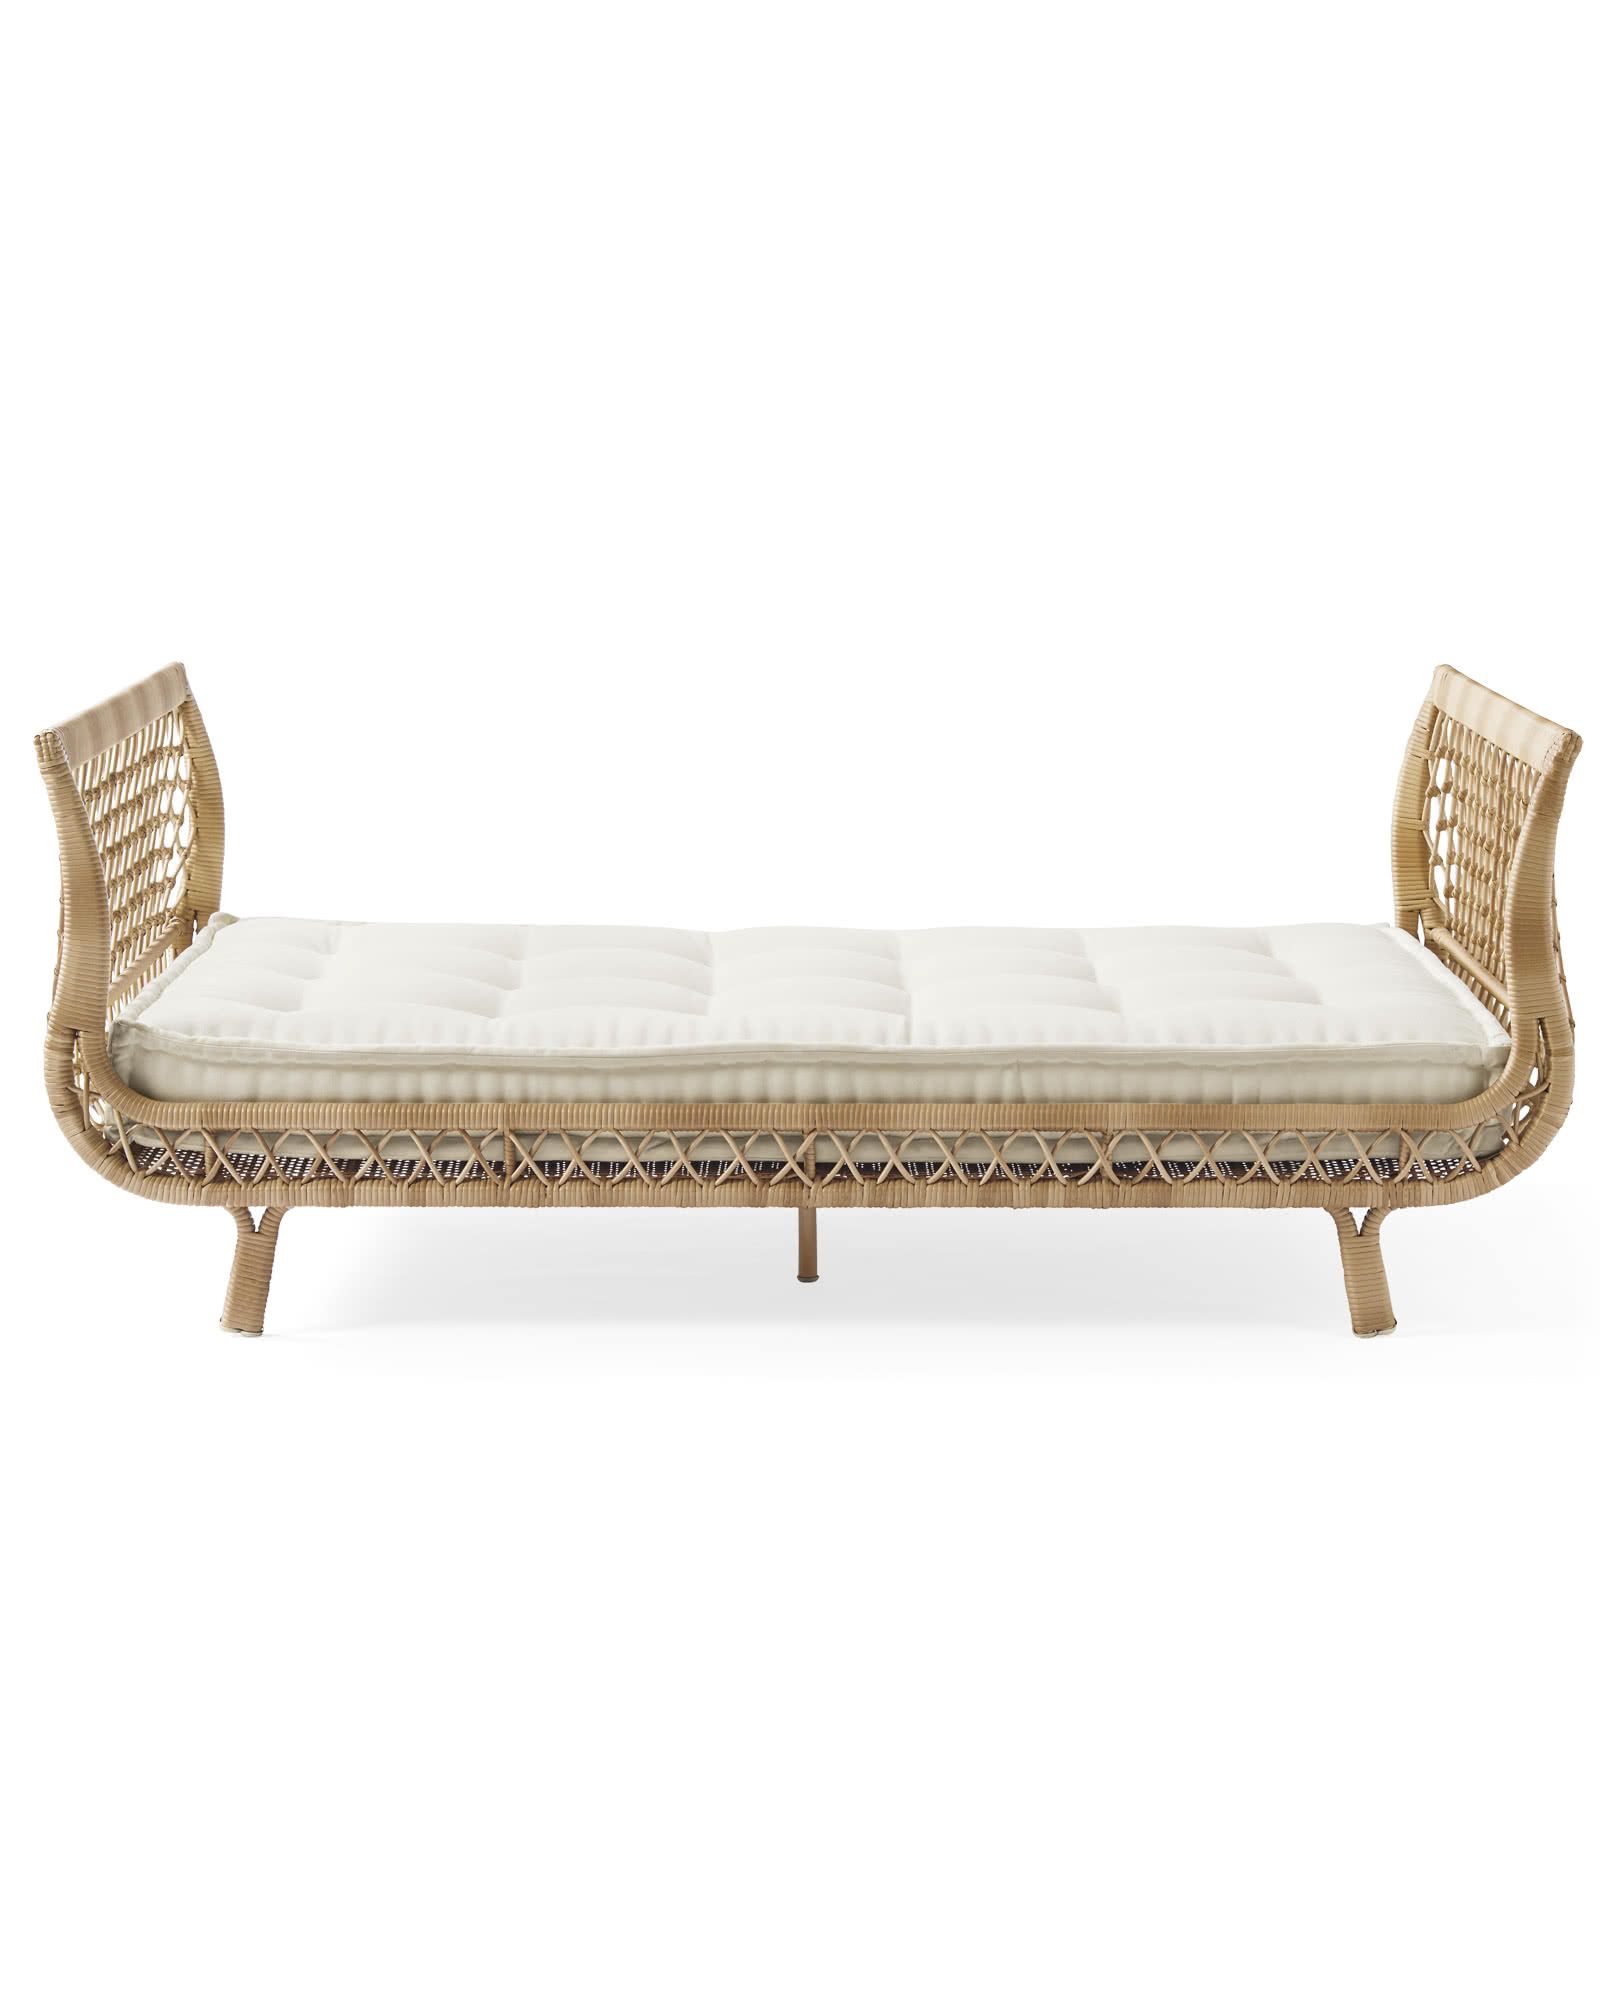 Capistrano Outdoor Daybed - Dune | Serena and Lily